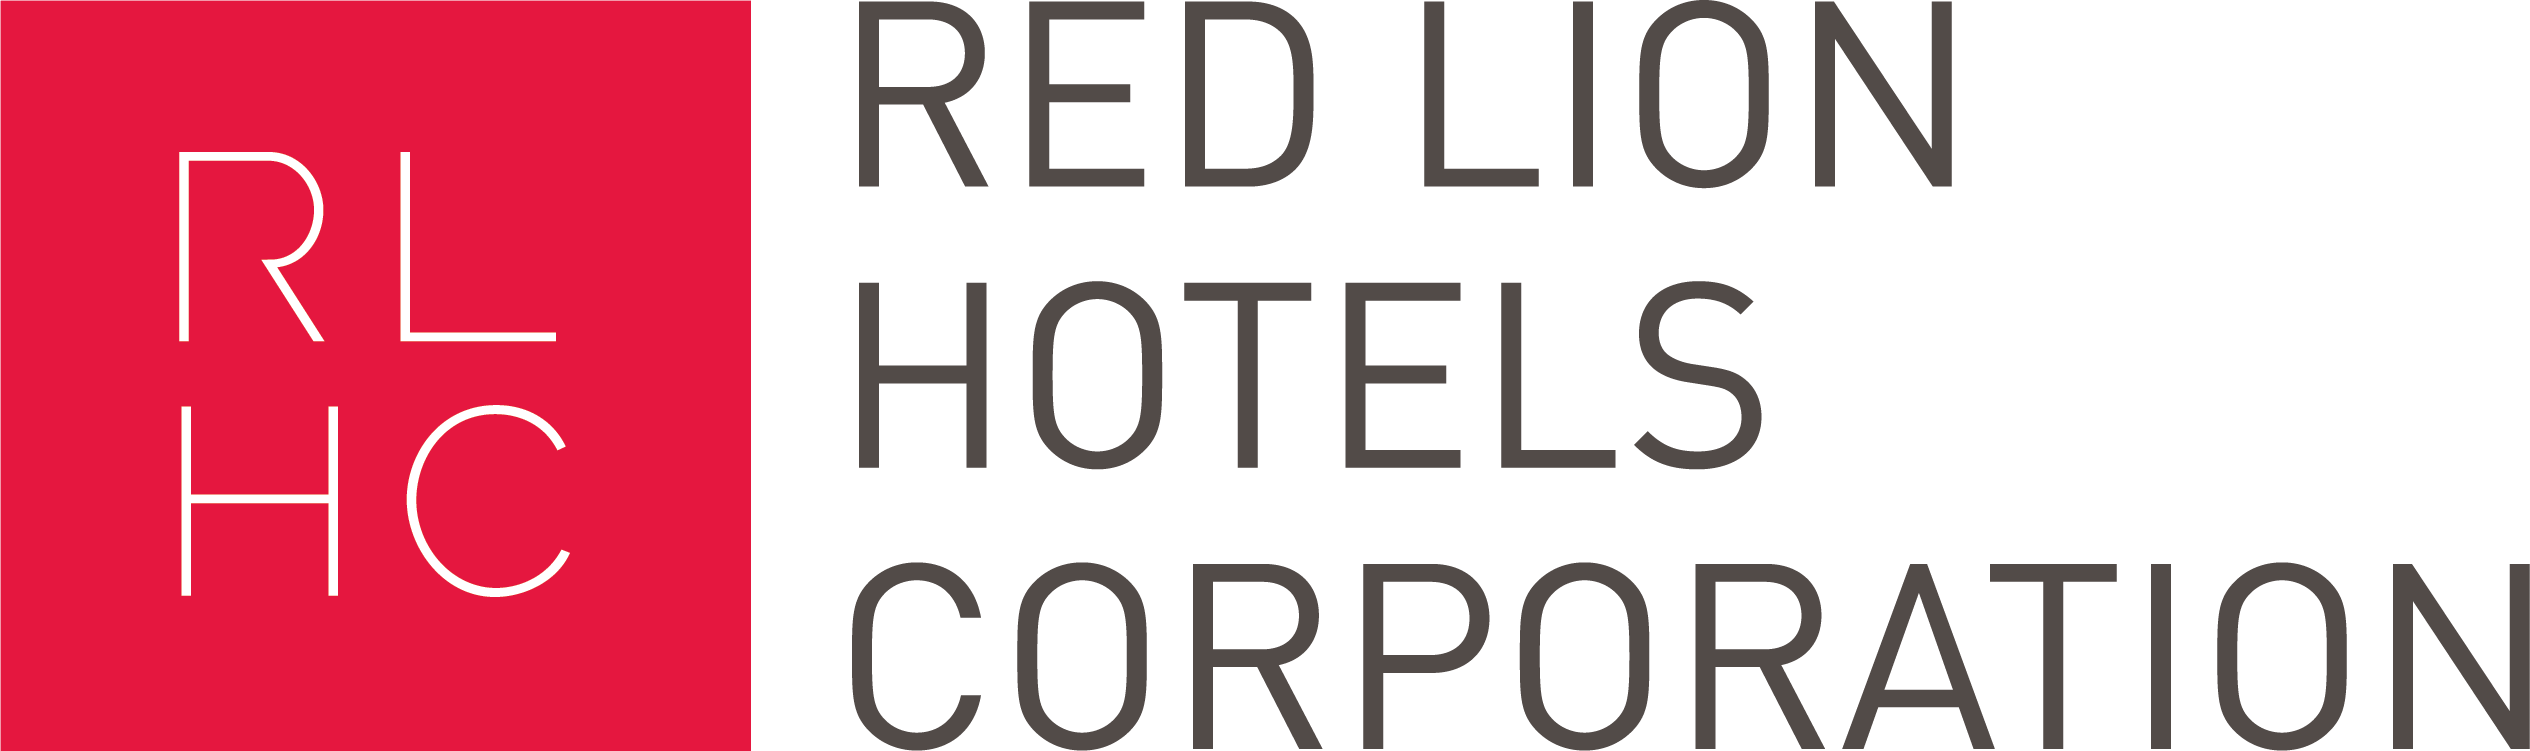 New Red Lion Hotels Logo - Red Lion Hotels Corp logo - No Vacancy